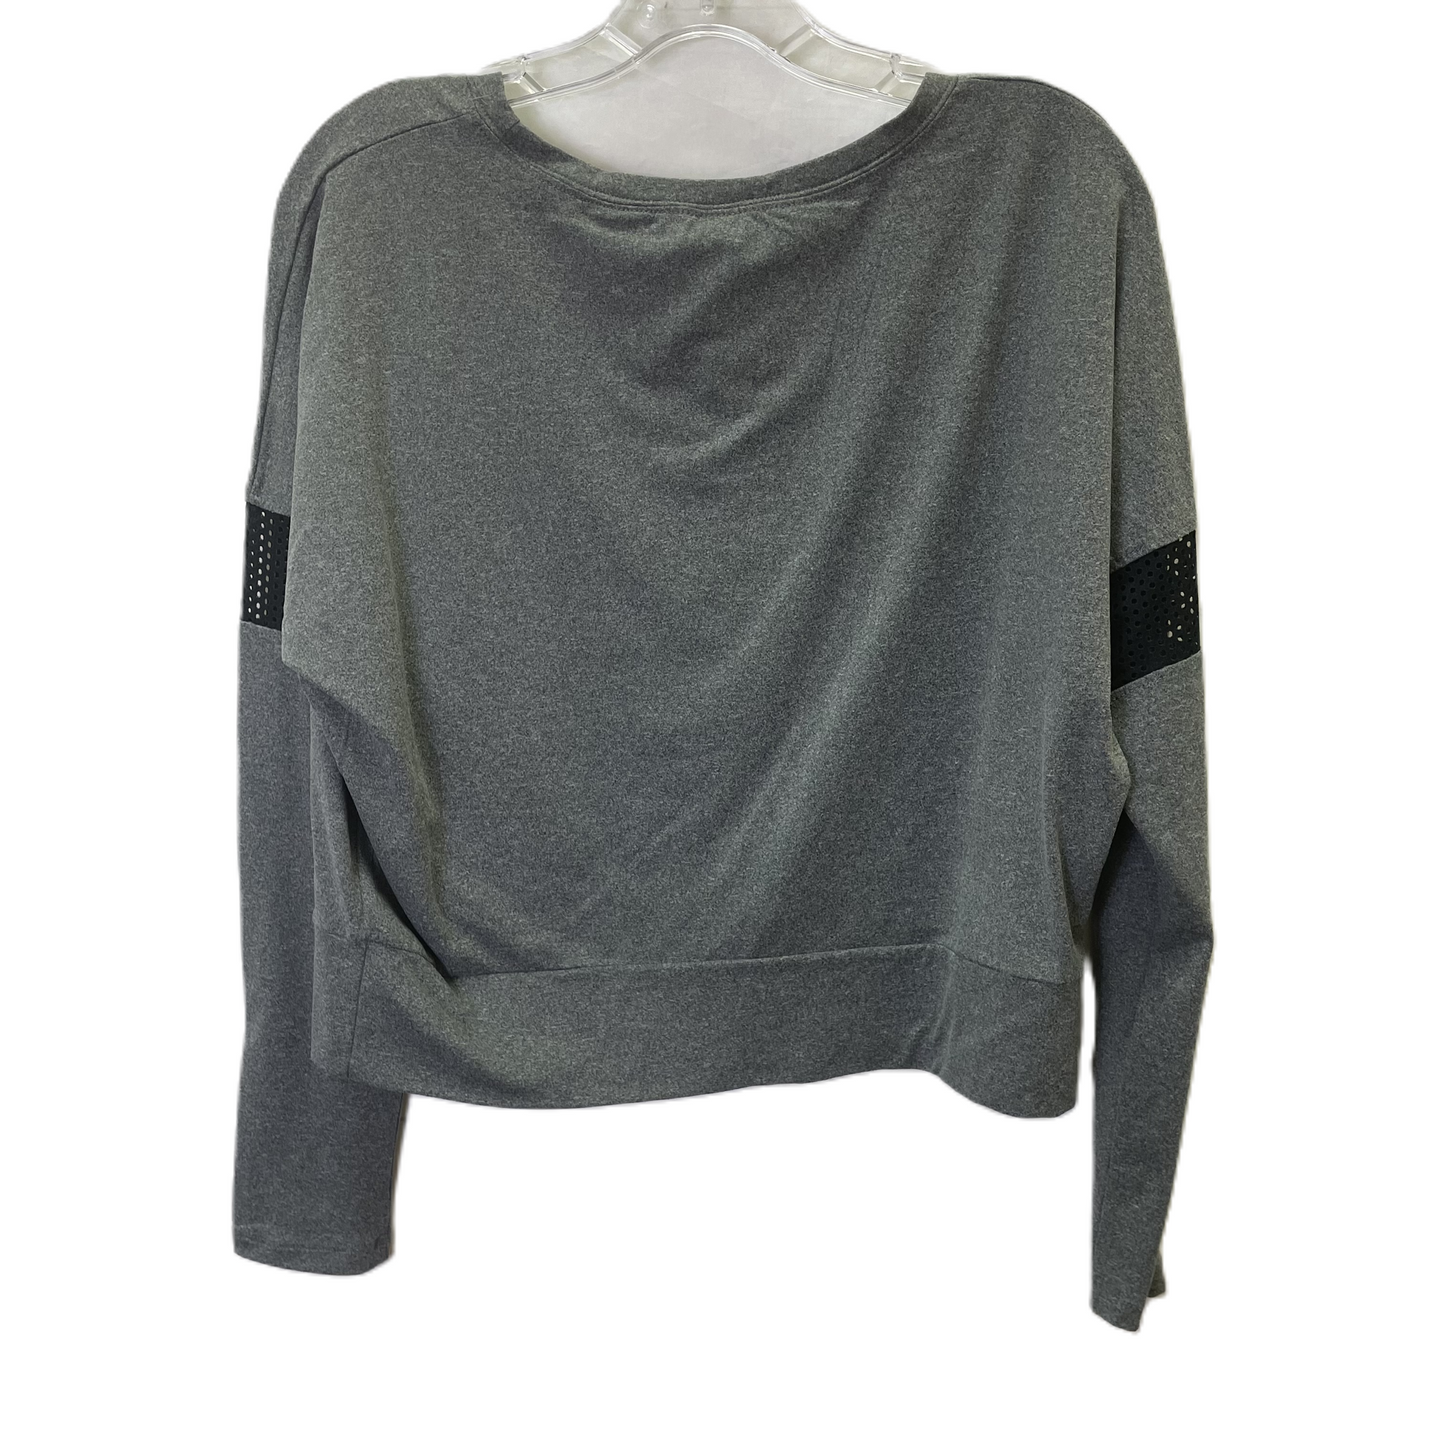 Athletic Top Long Sleeve Crewneck By Balance Collection  Size: M